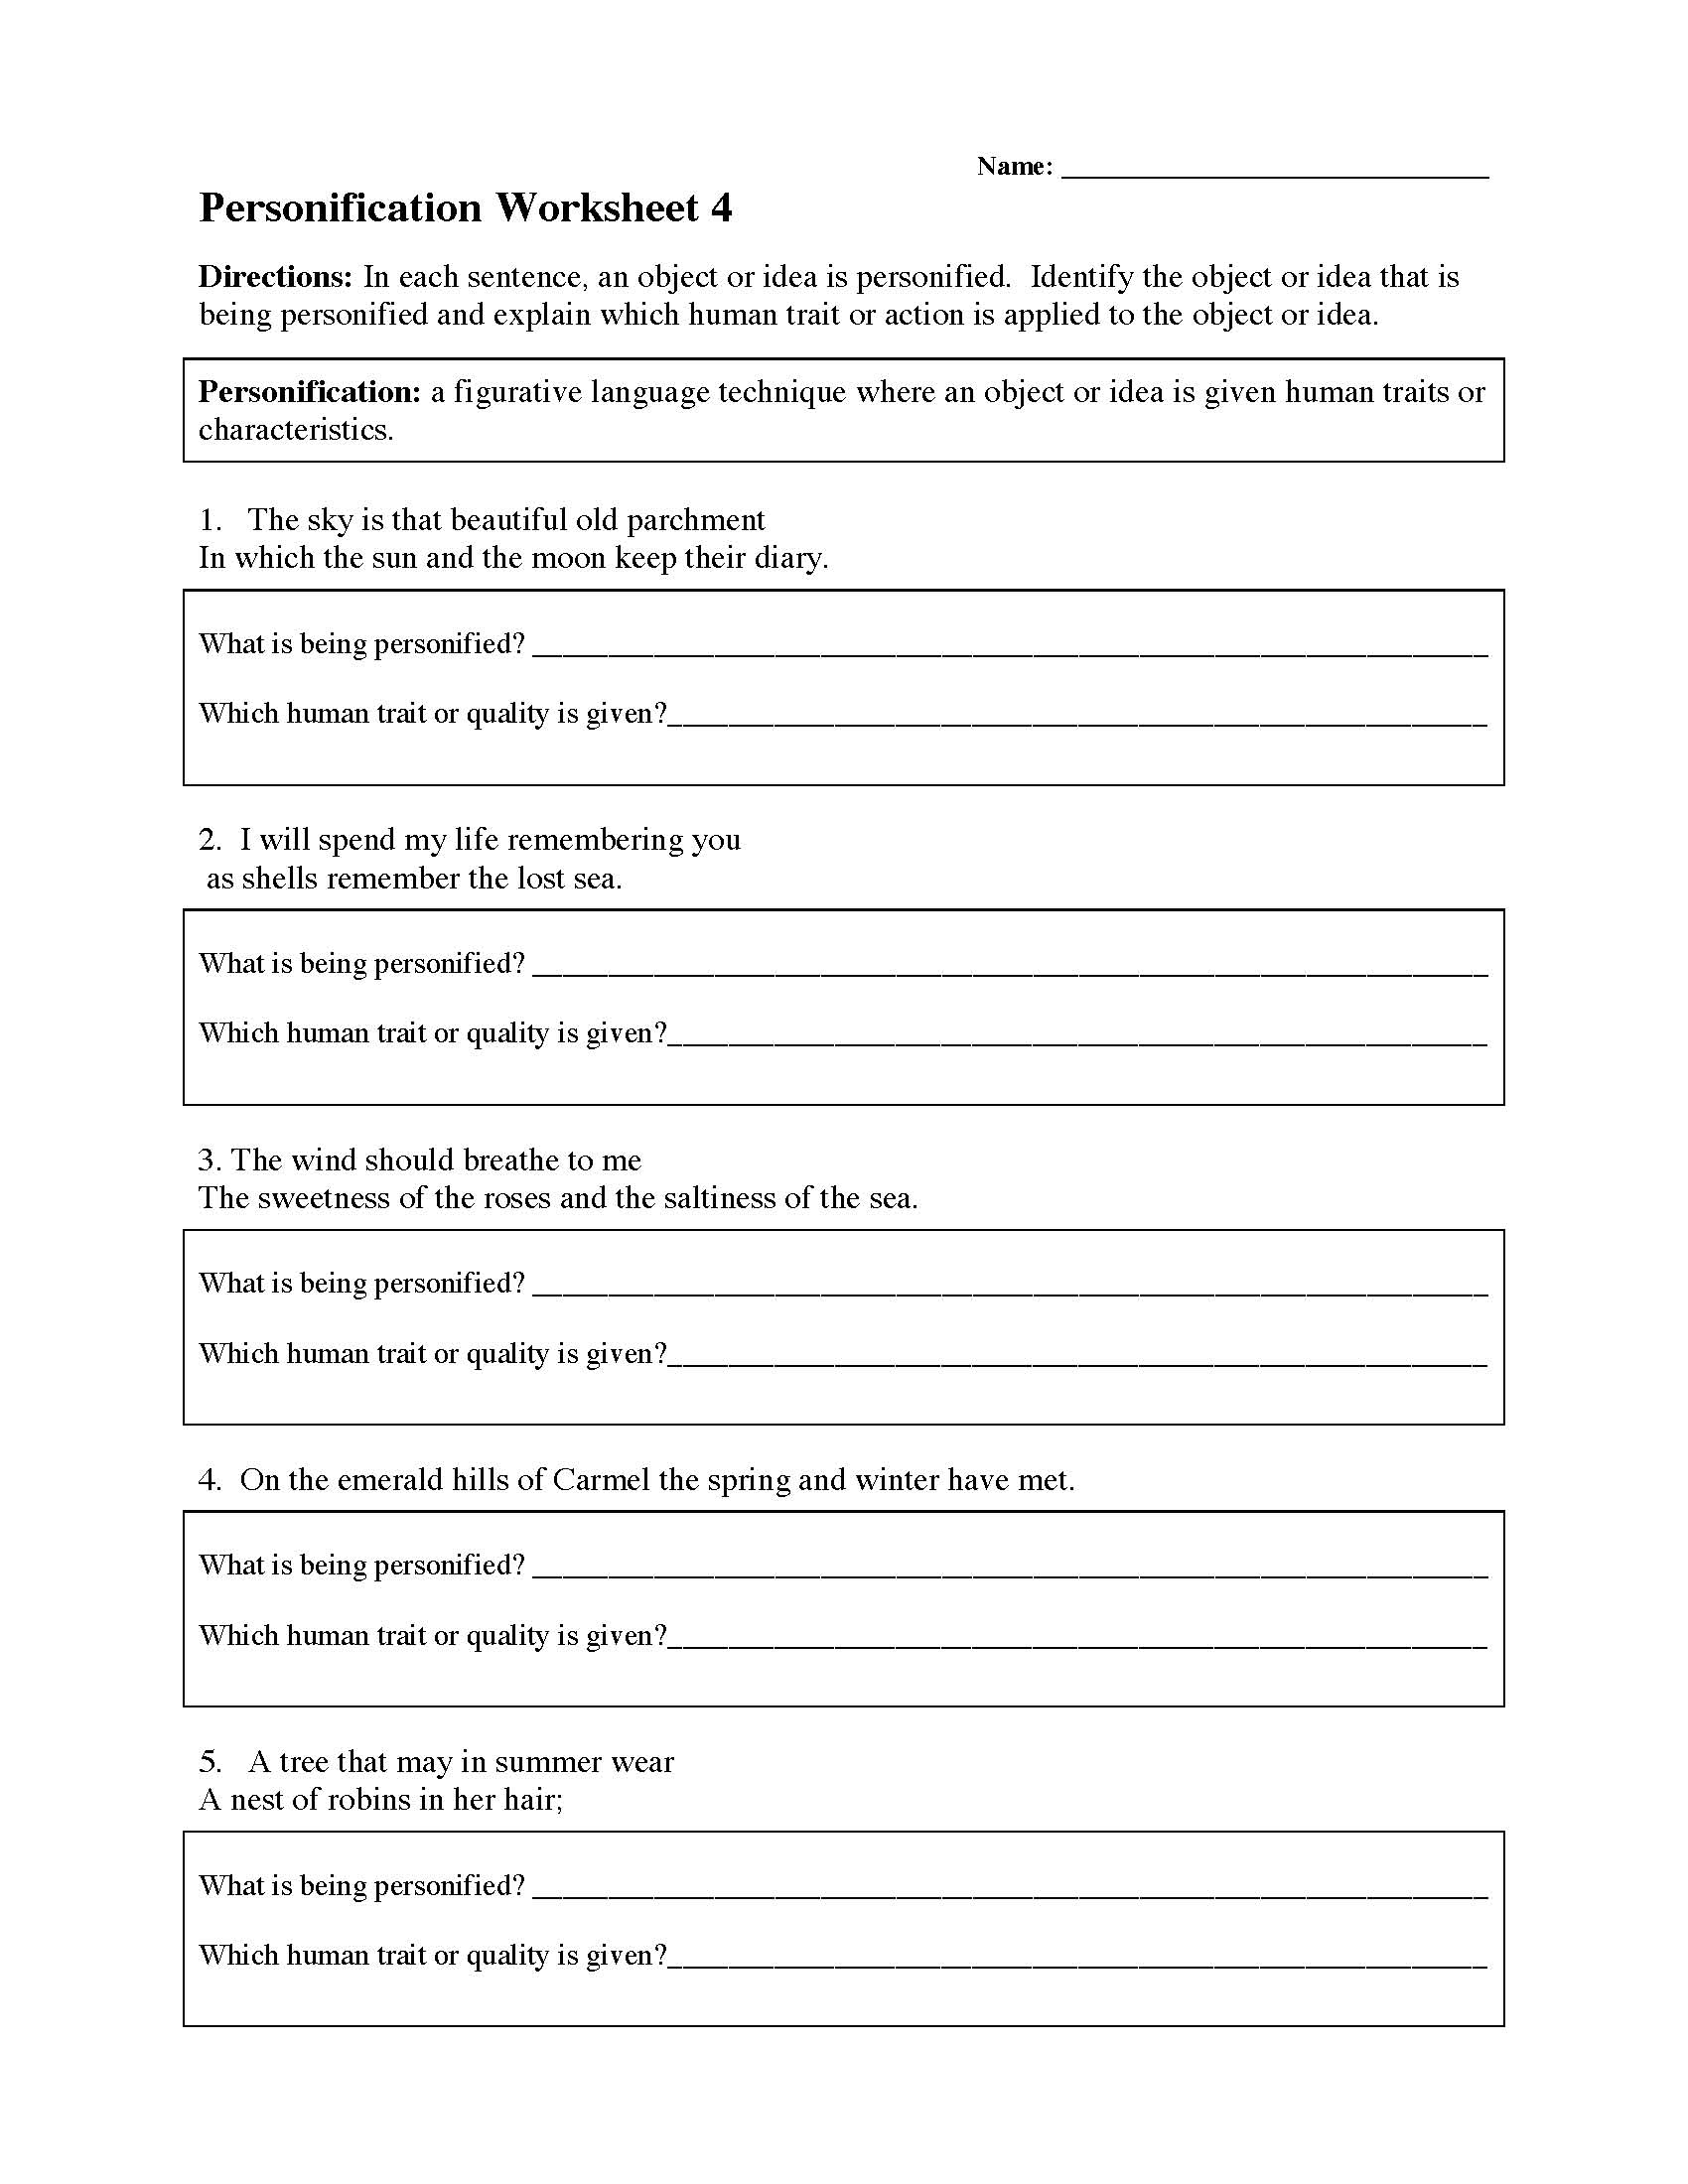 personification-worksheets